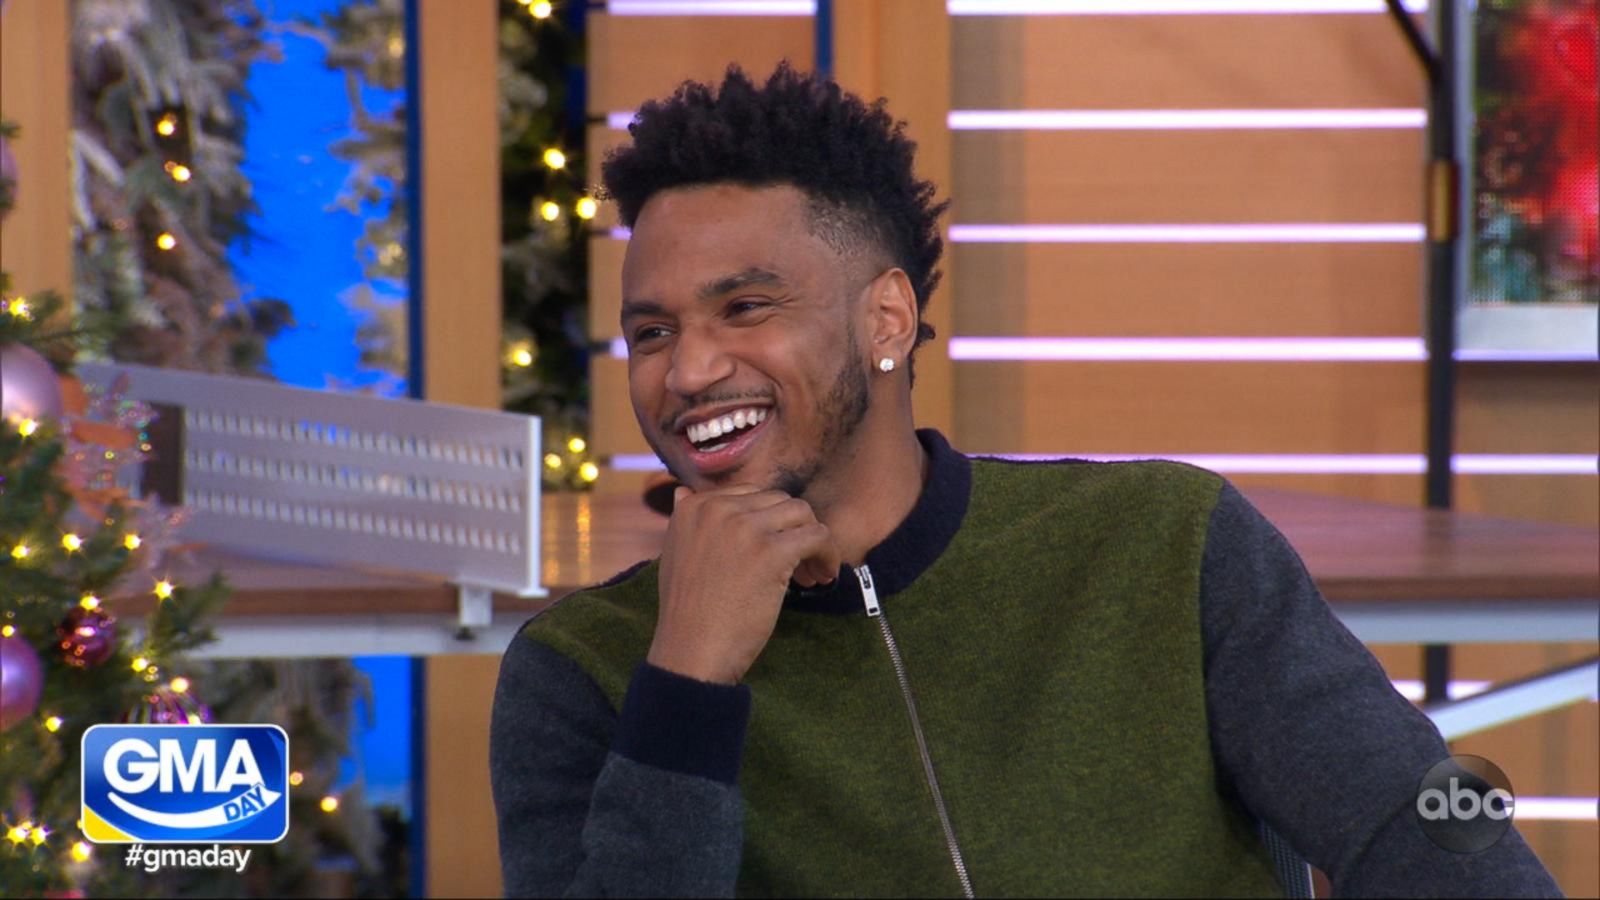 Trey Songz Tells Gma Day The Story Behind His Surprise Mixtapes Good Morning America